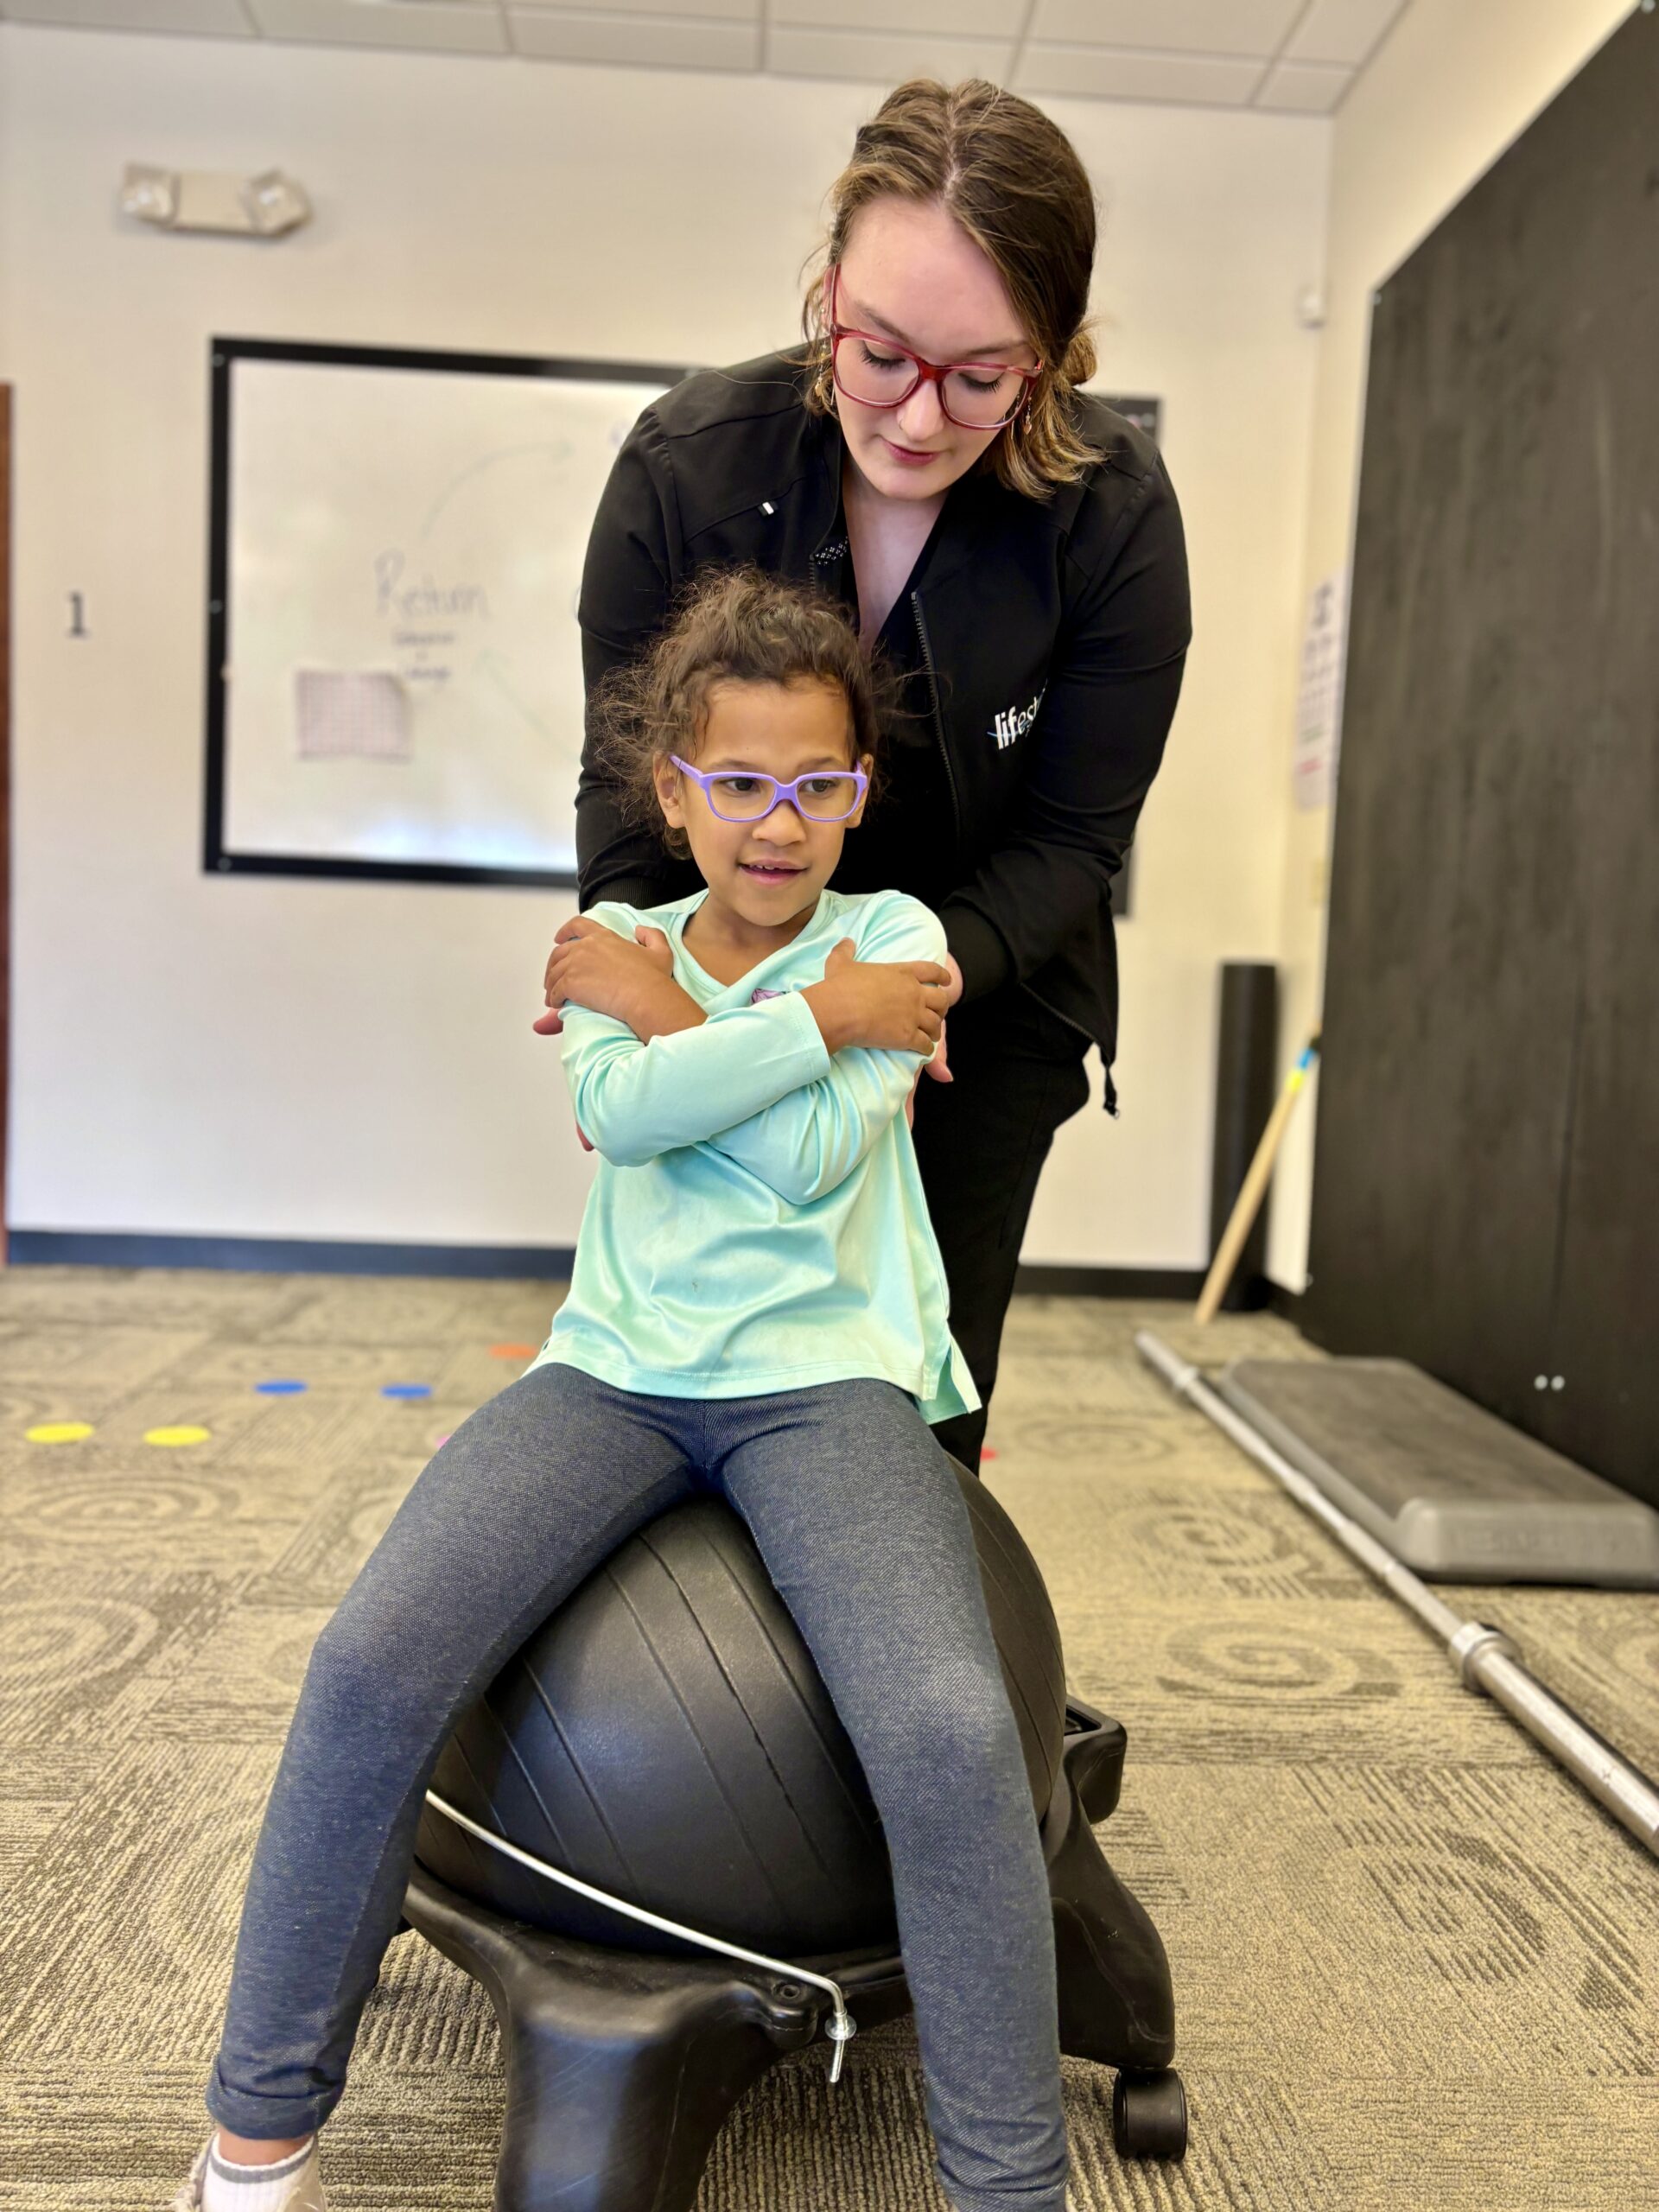 Little girl sitting on an exercise ball balancing with help from a provider